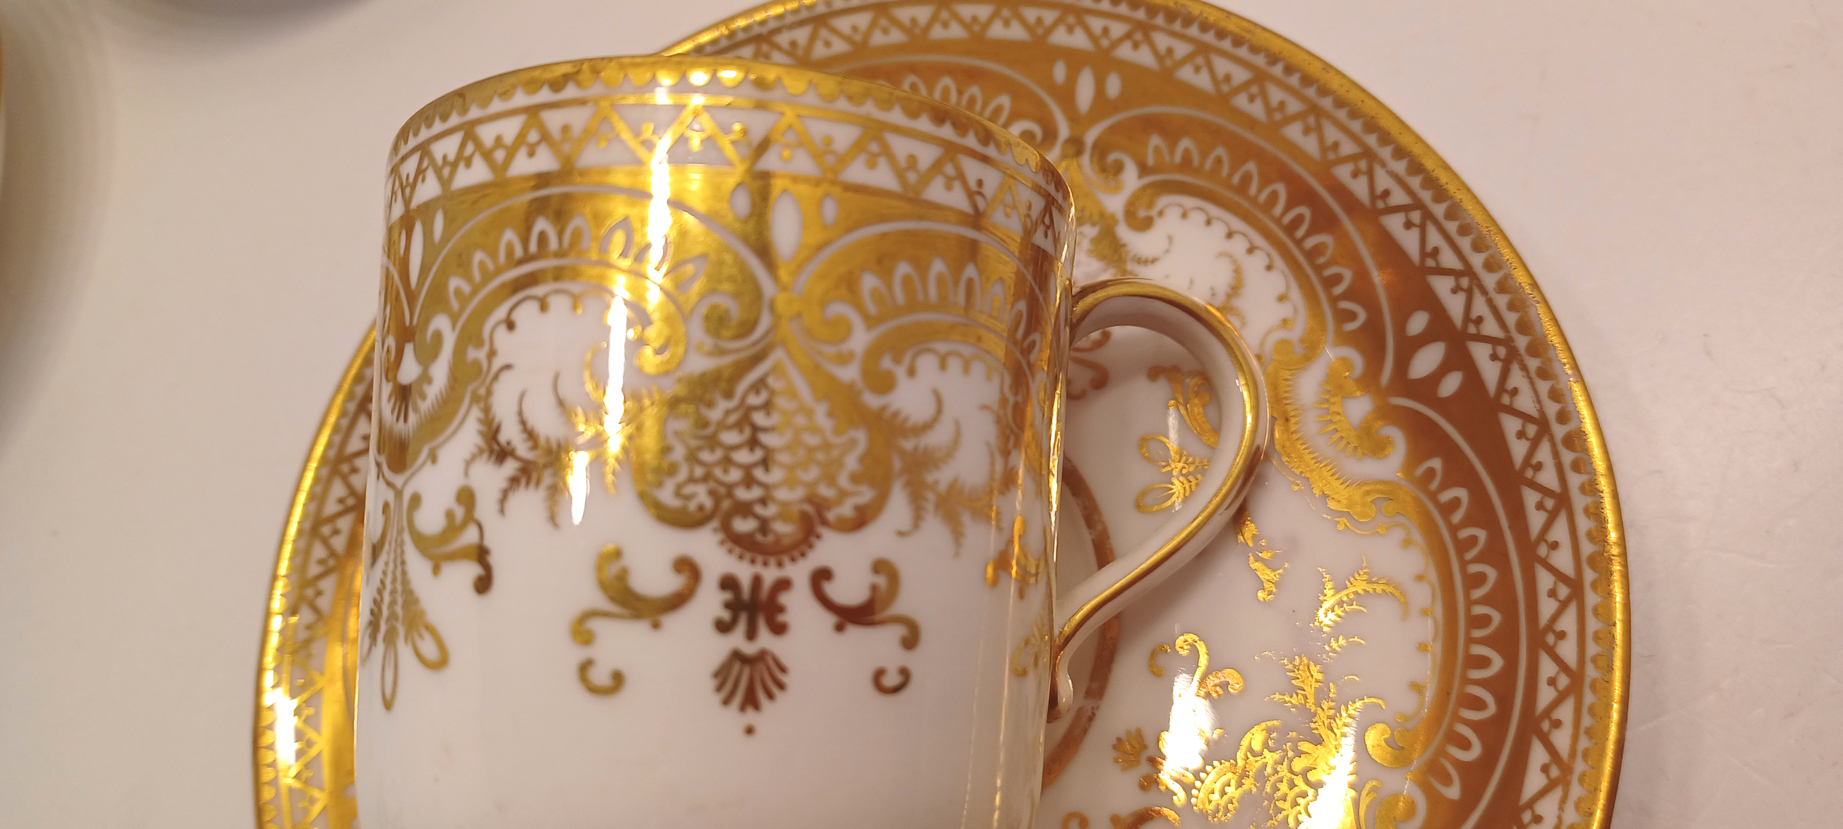 6 COFFEE CANS AND SAUCERS IN GOLD PATTERN - Image 2 of 3